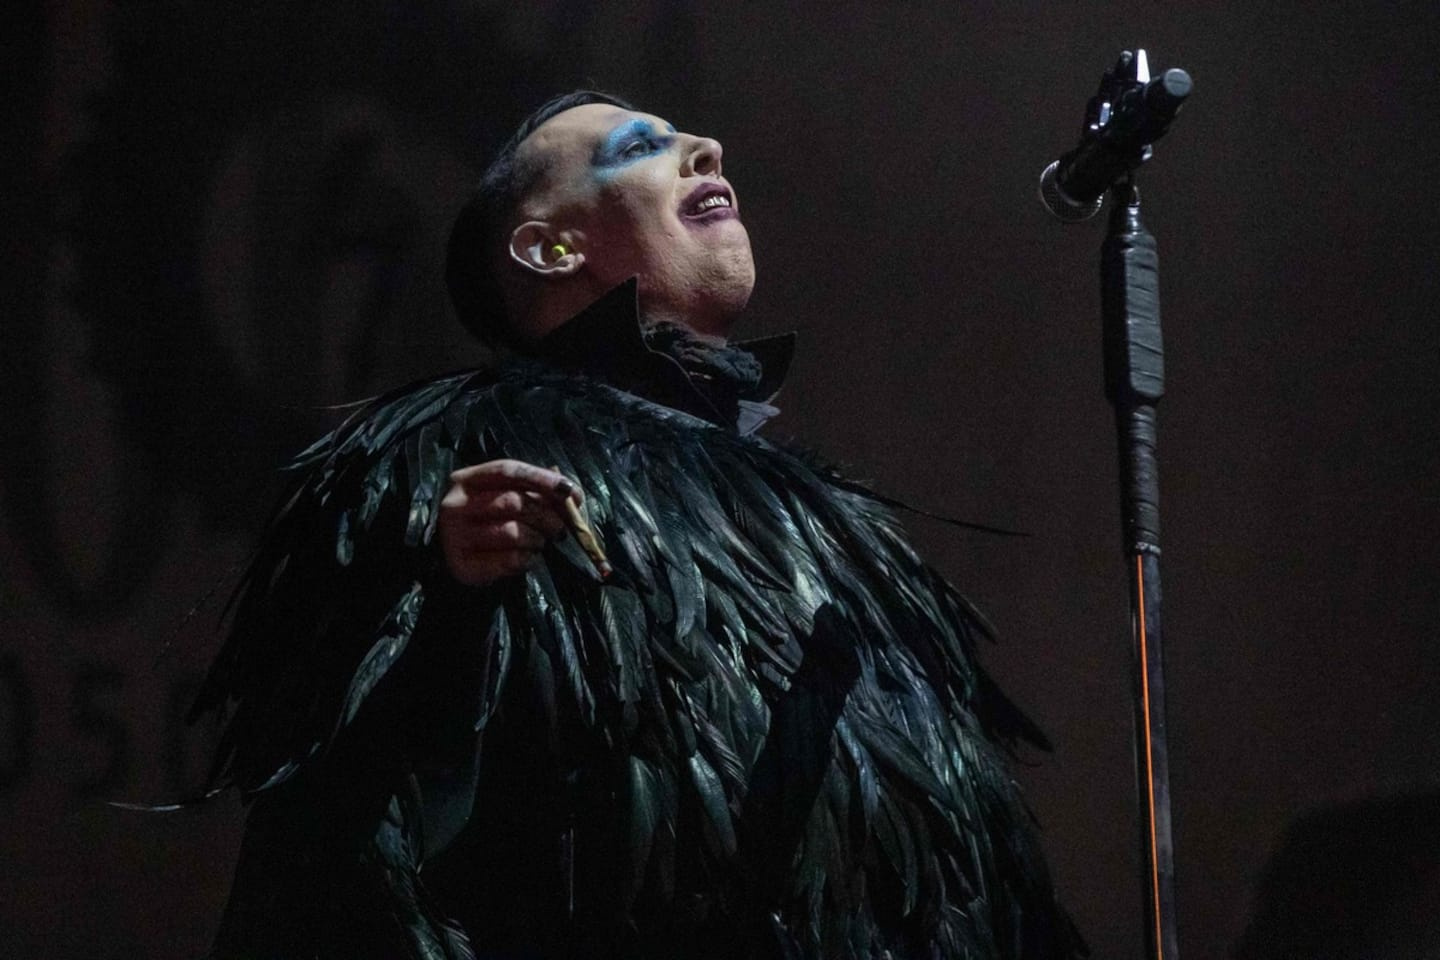 A new complaint for sexual violence against Marilyn Manson dismissed